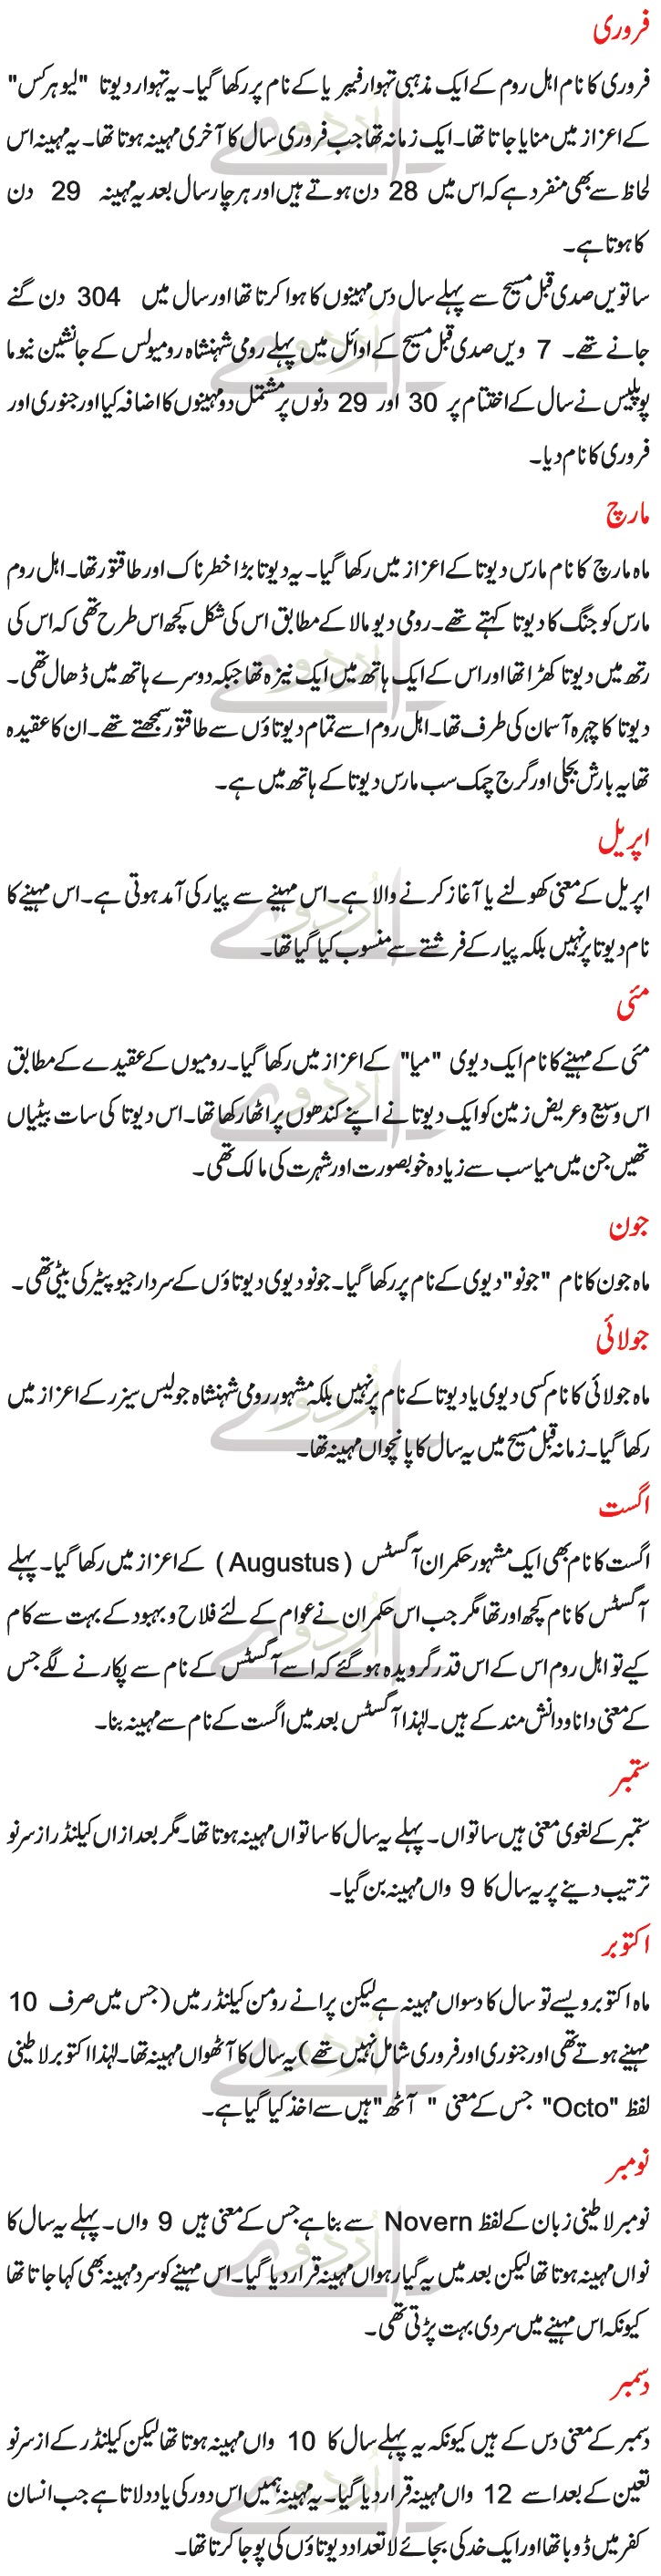 Interesting Facts About Months in Urdu